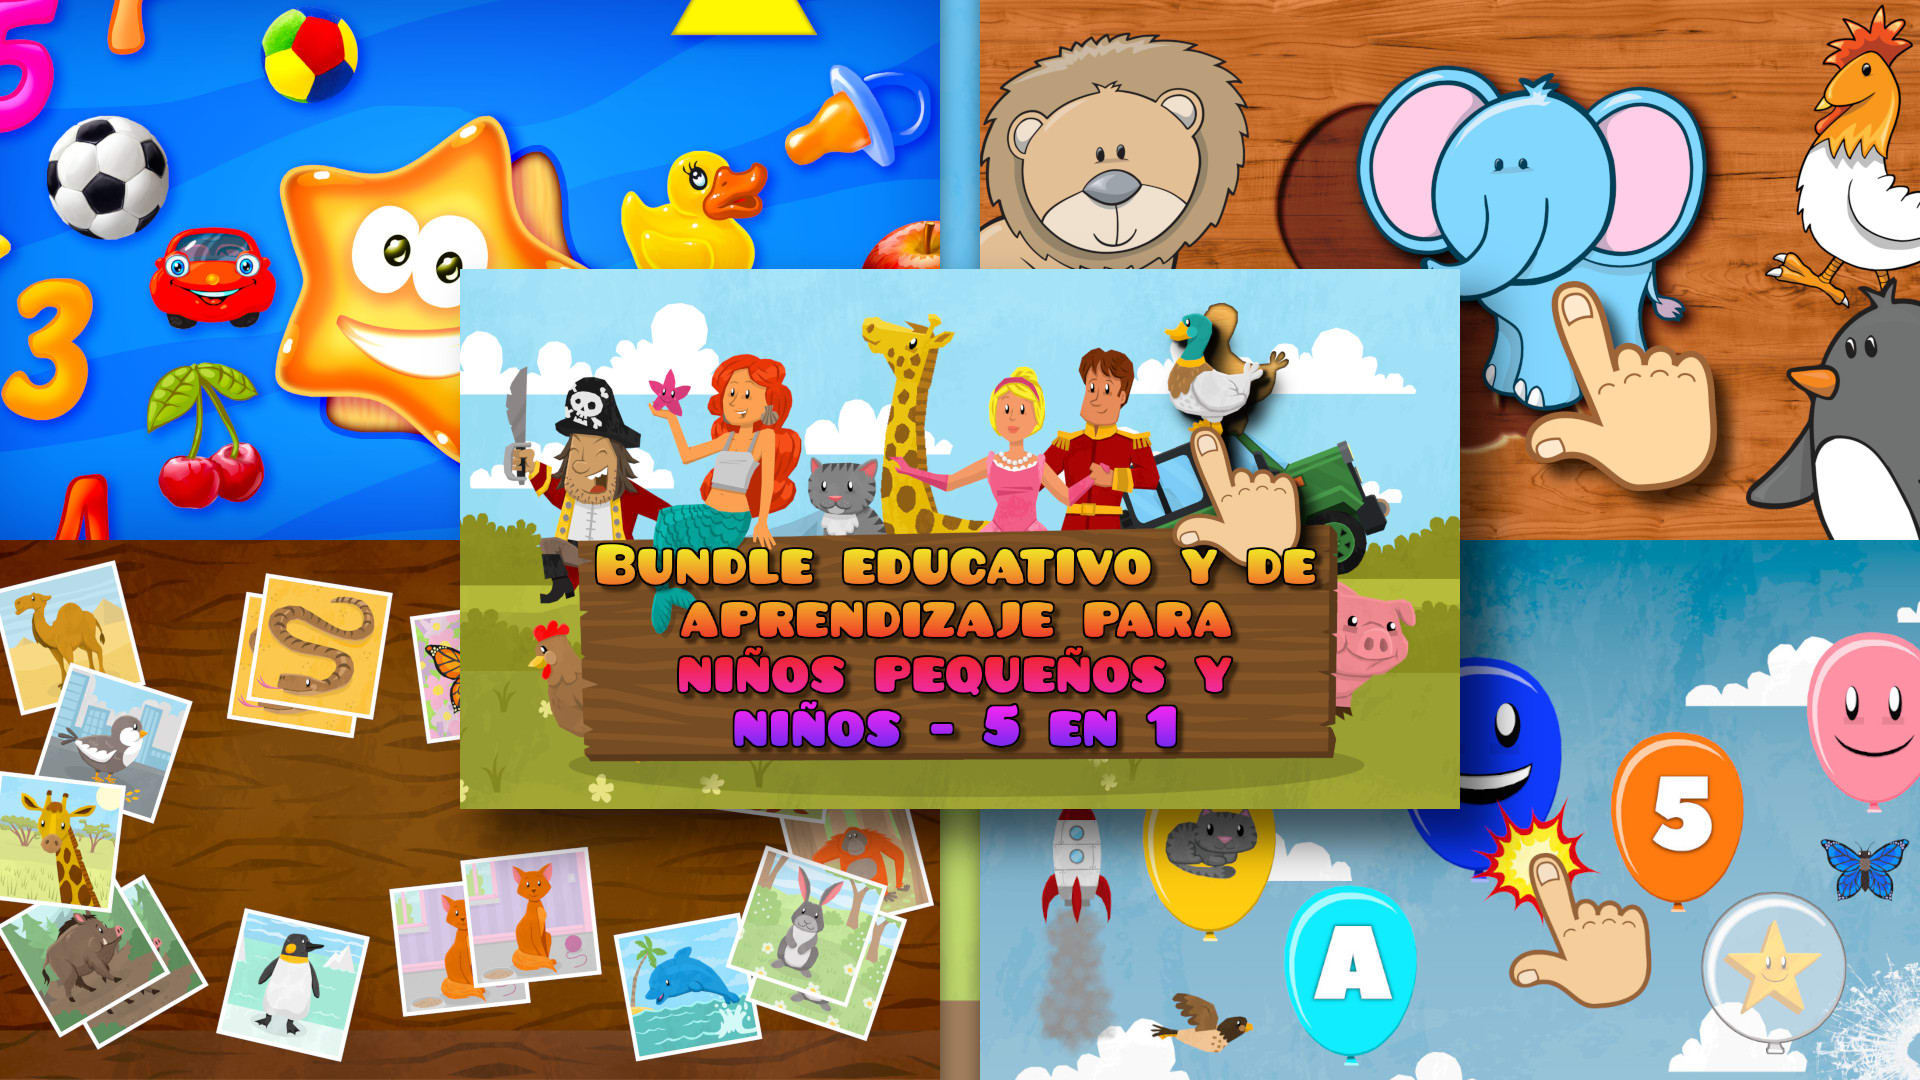 Educational and Learning Bundle for Toddlers and Kids - 5 in 1